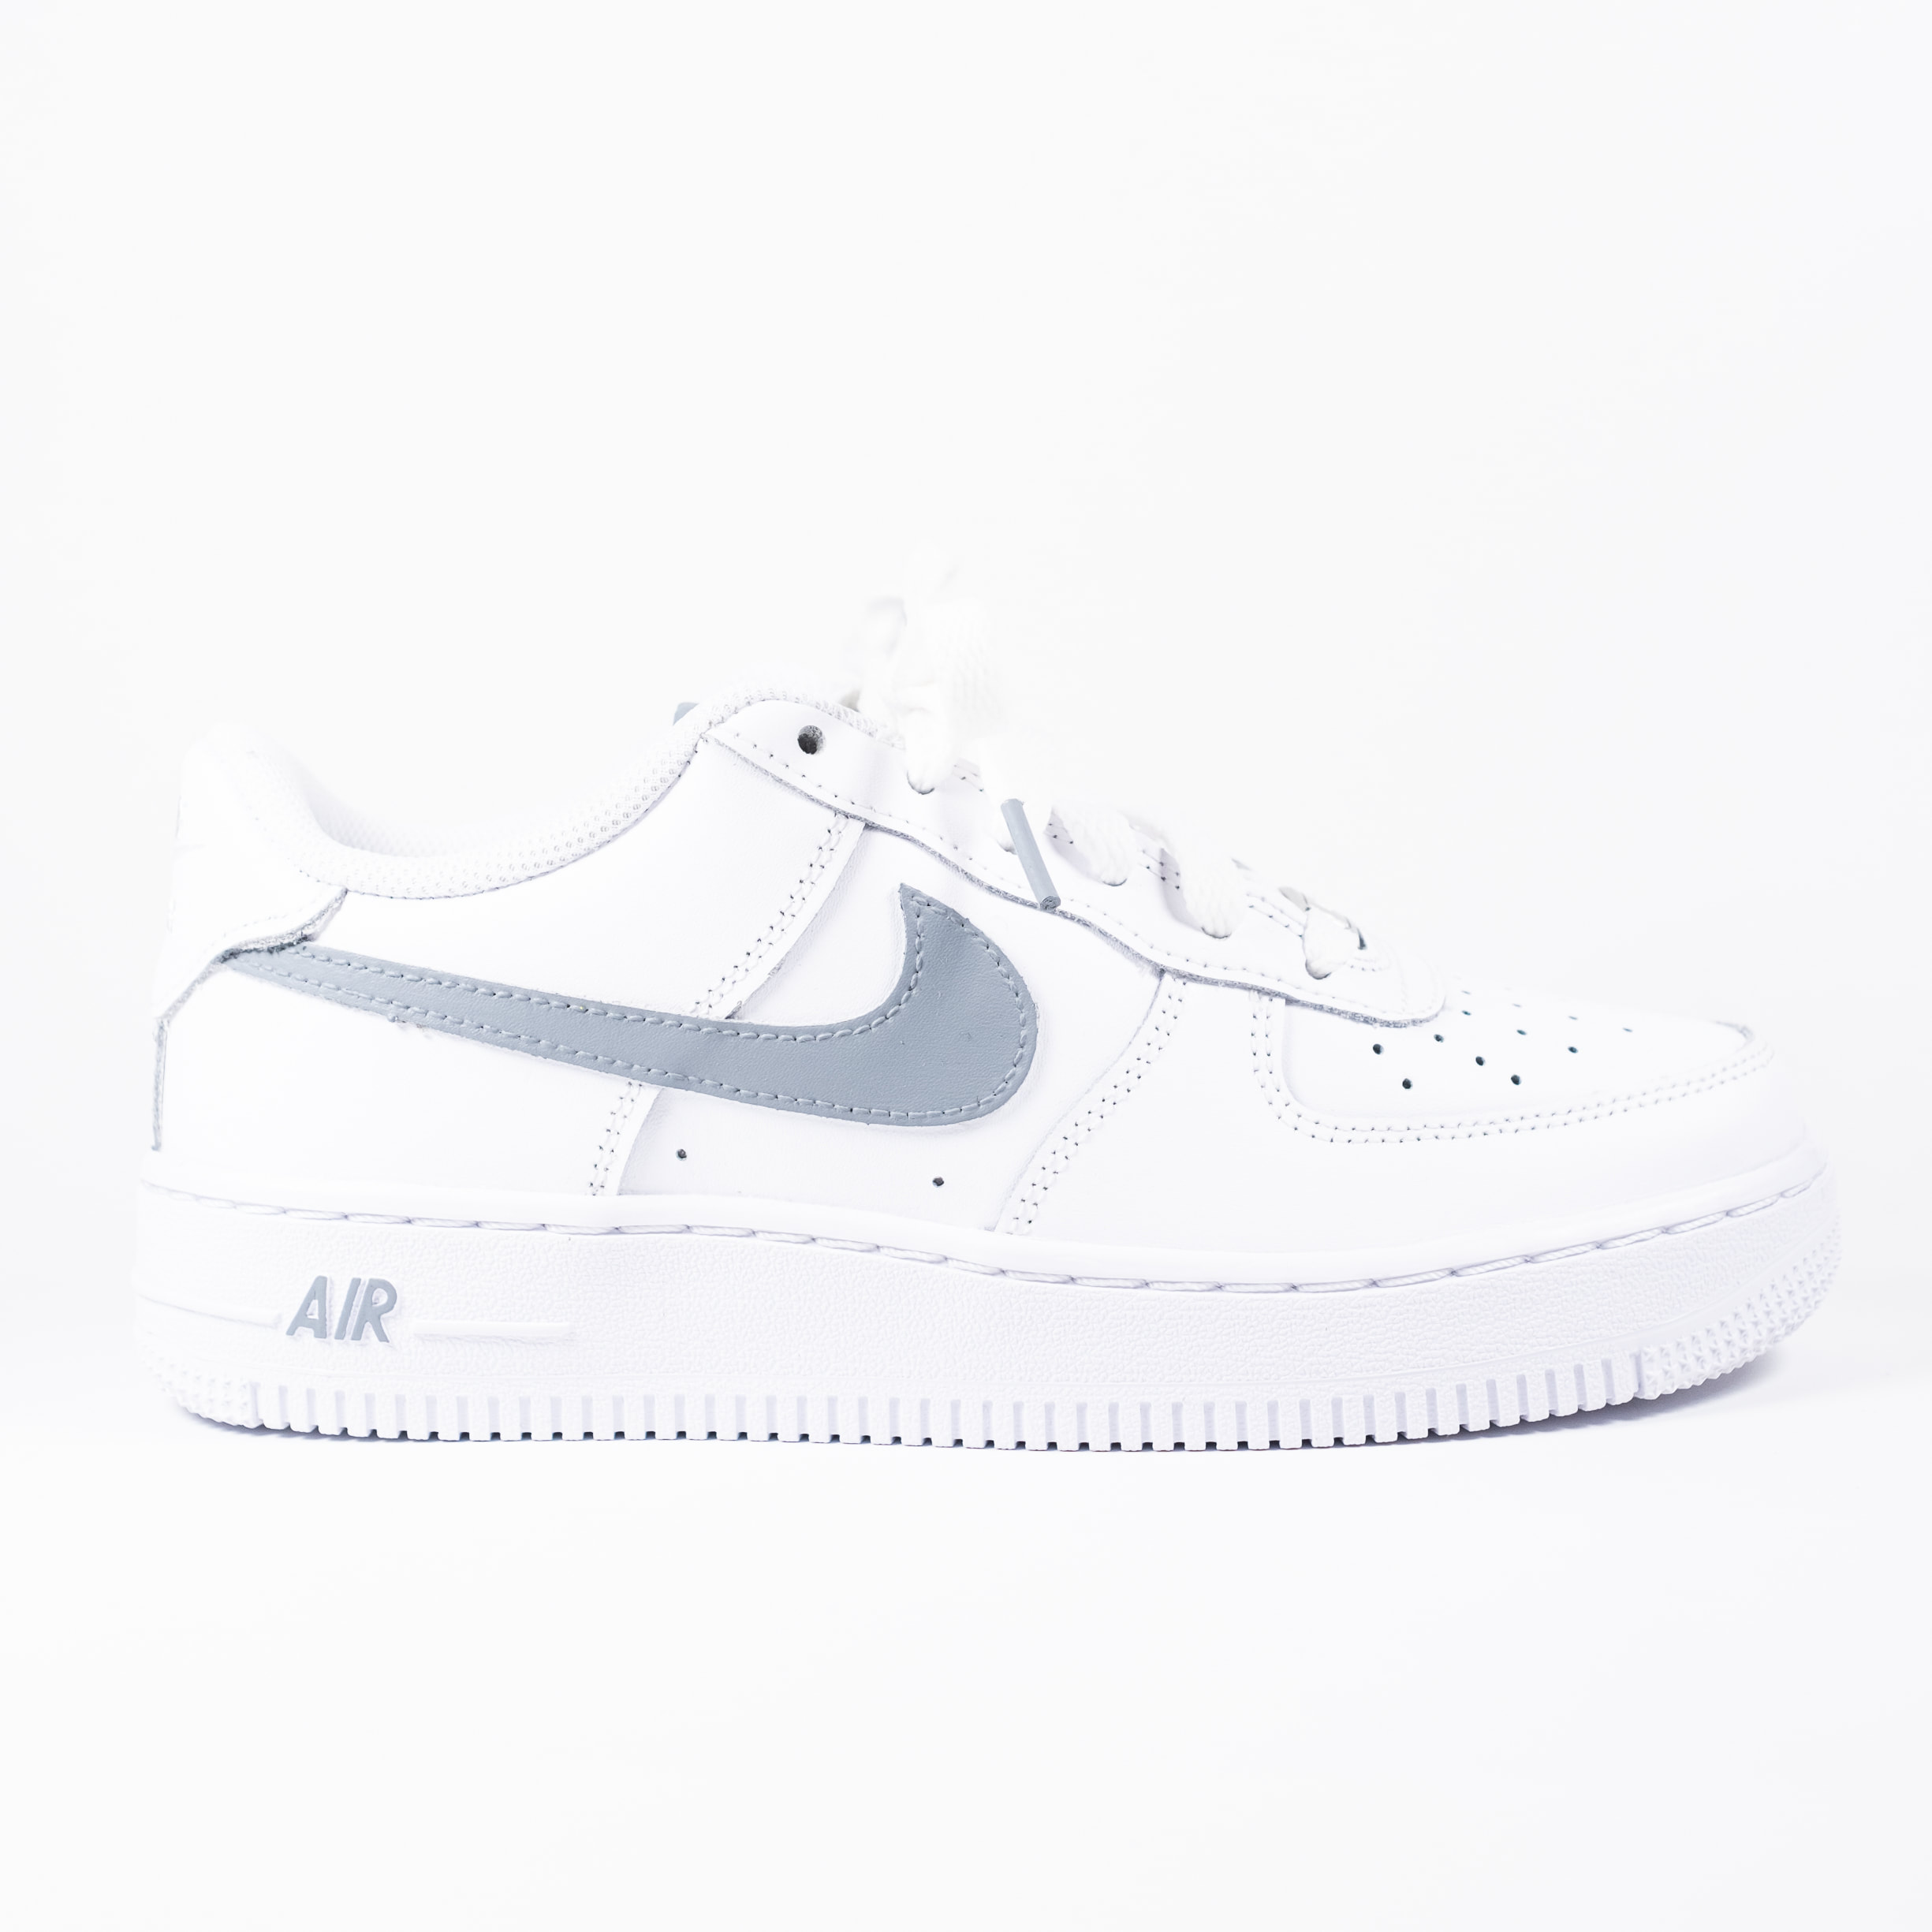 Nike Air Force 1 Worldwide sneakers in gray with black swoosh